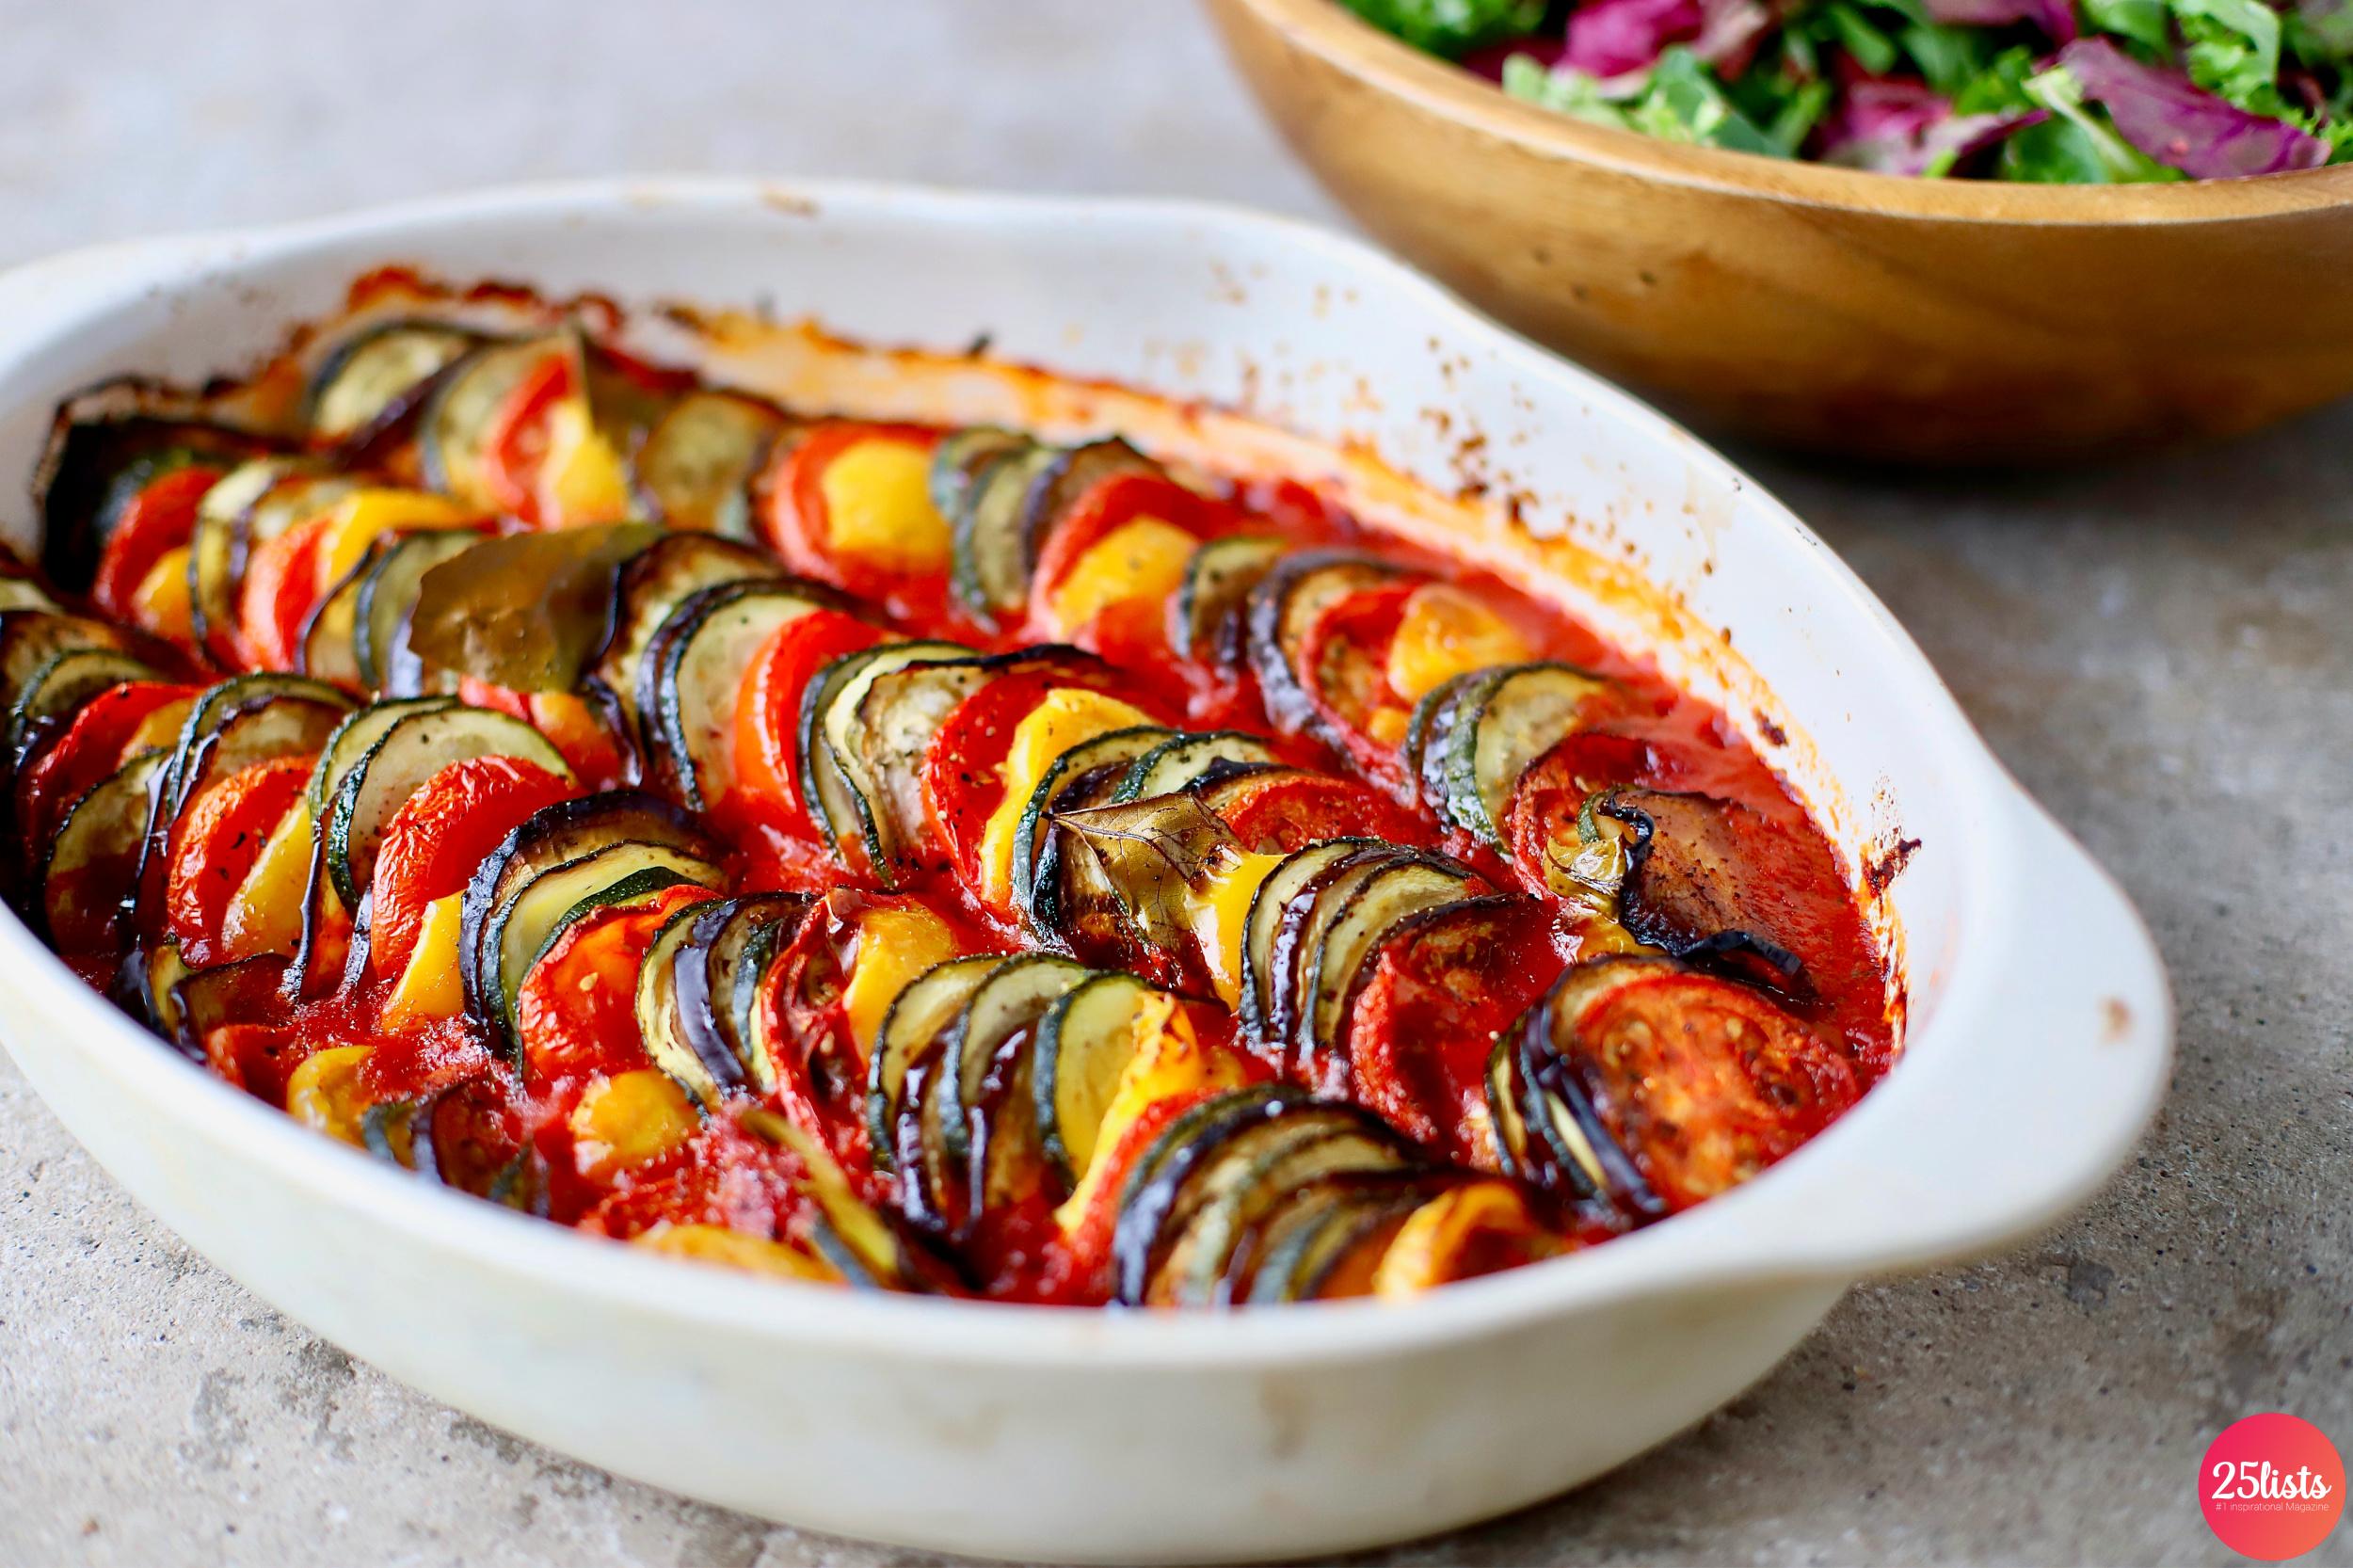 Baked Ratatouille Casserole : Recipe and best photos